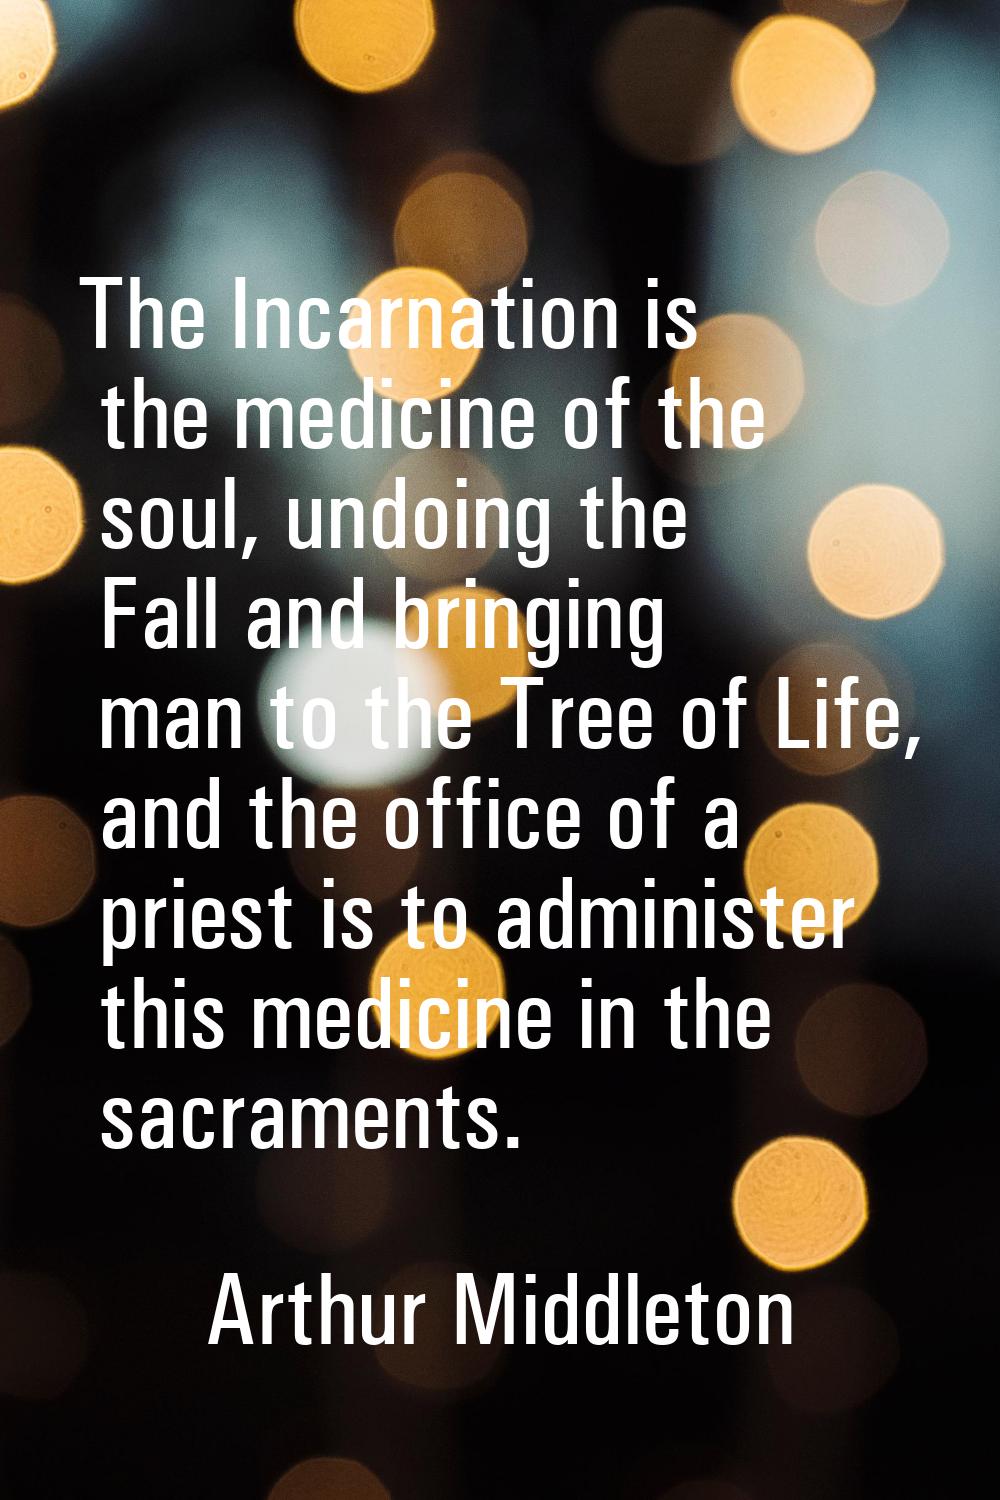 The Incarnation is the medicine of the soul, undoing the Fall and bringing man to the Tree of Life,